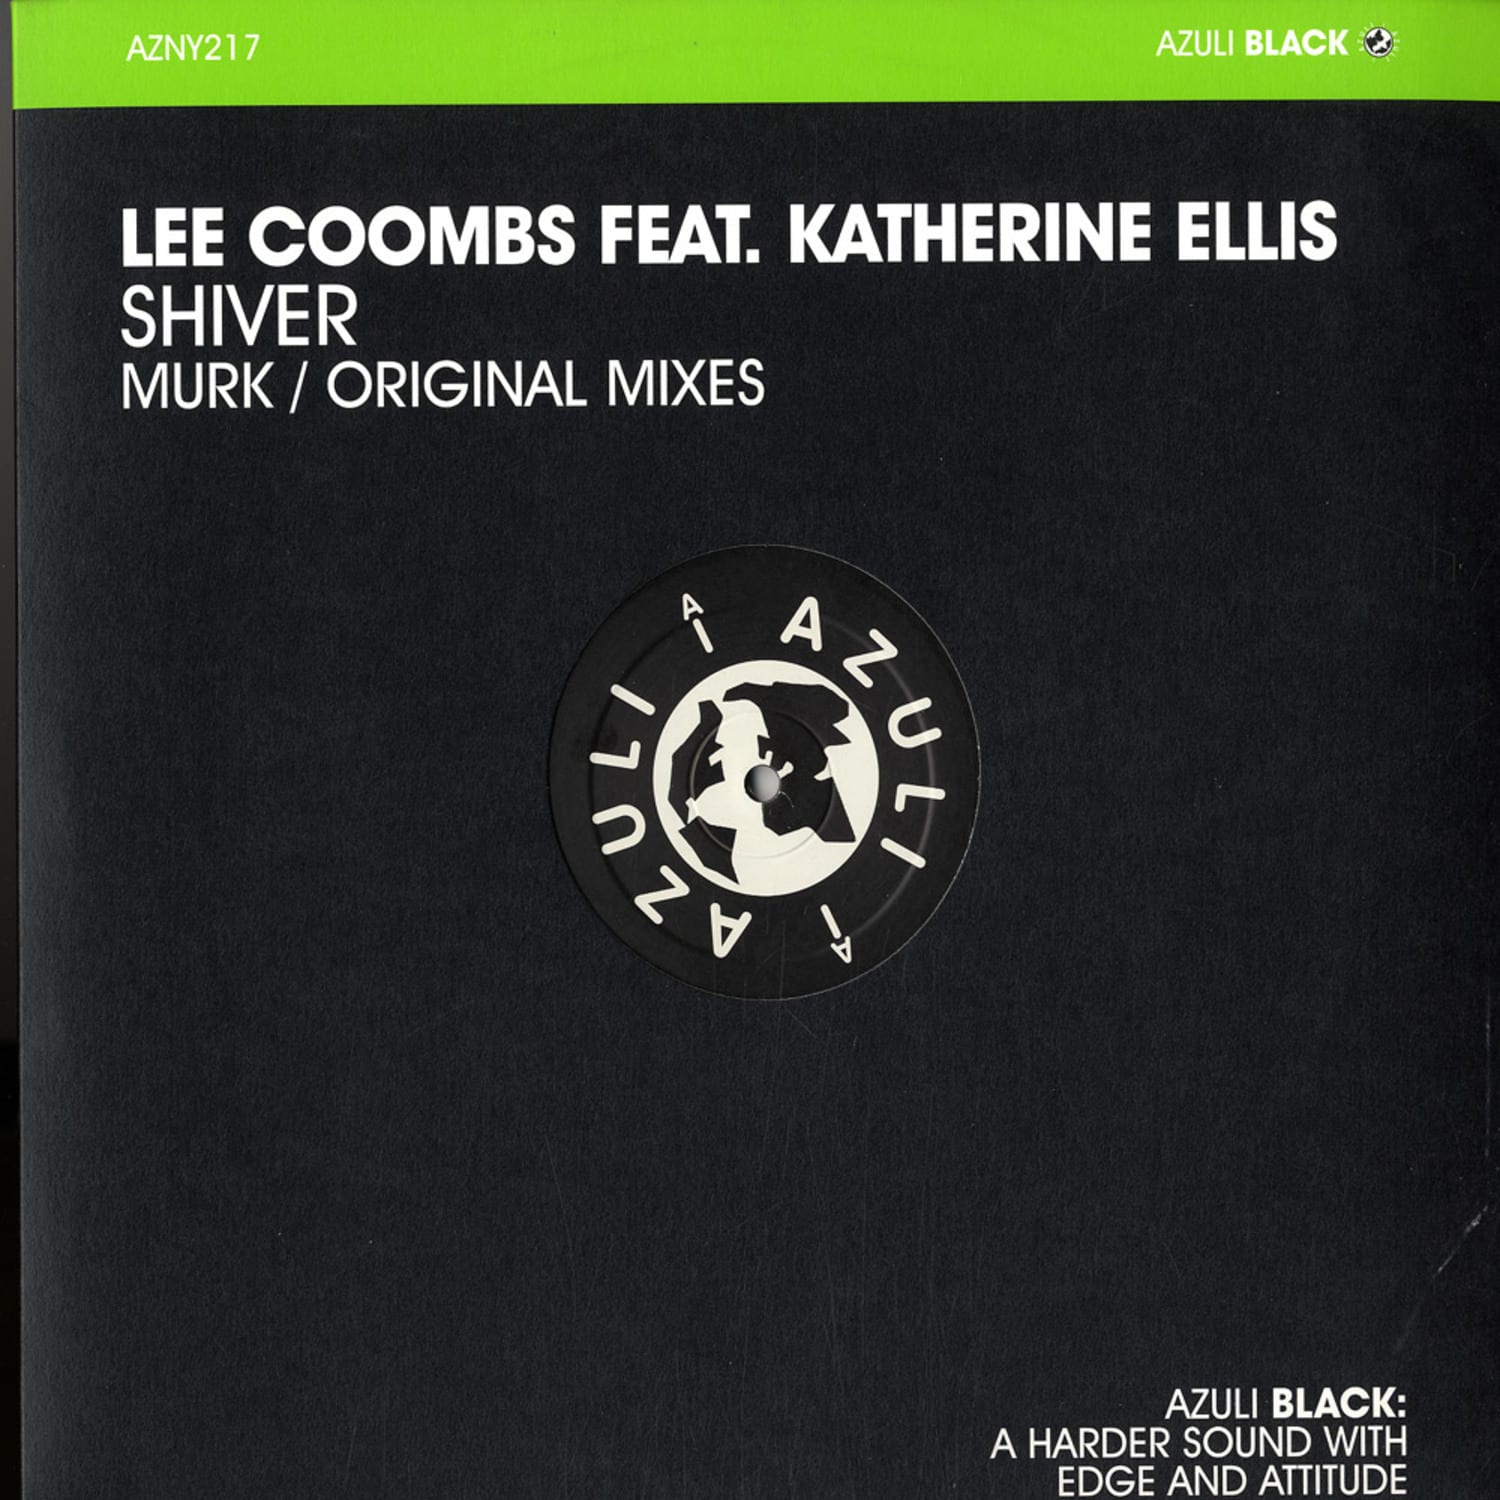 Lee Coombs - SHIVER 